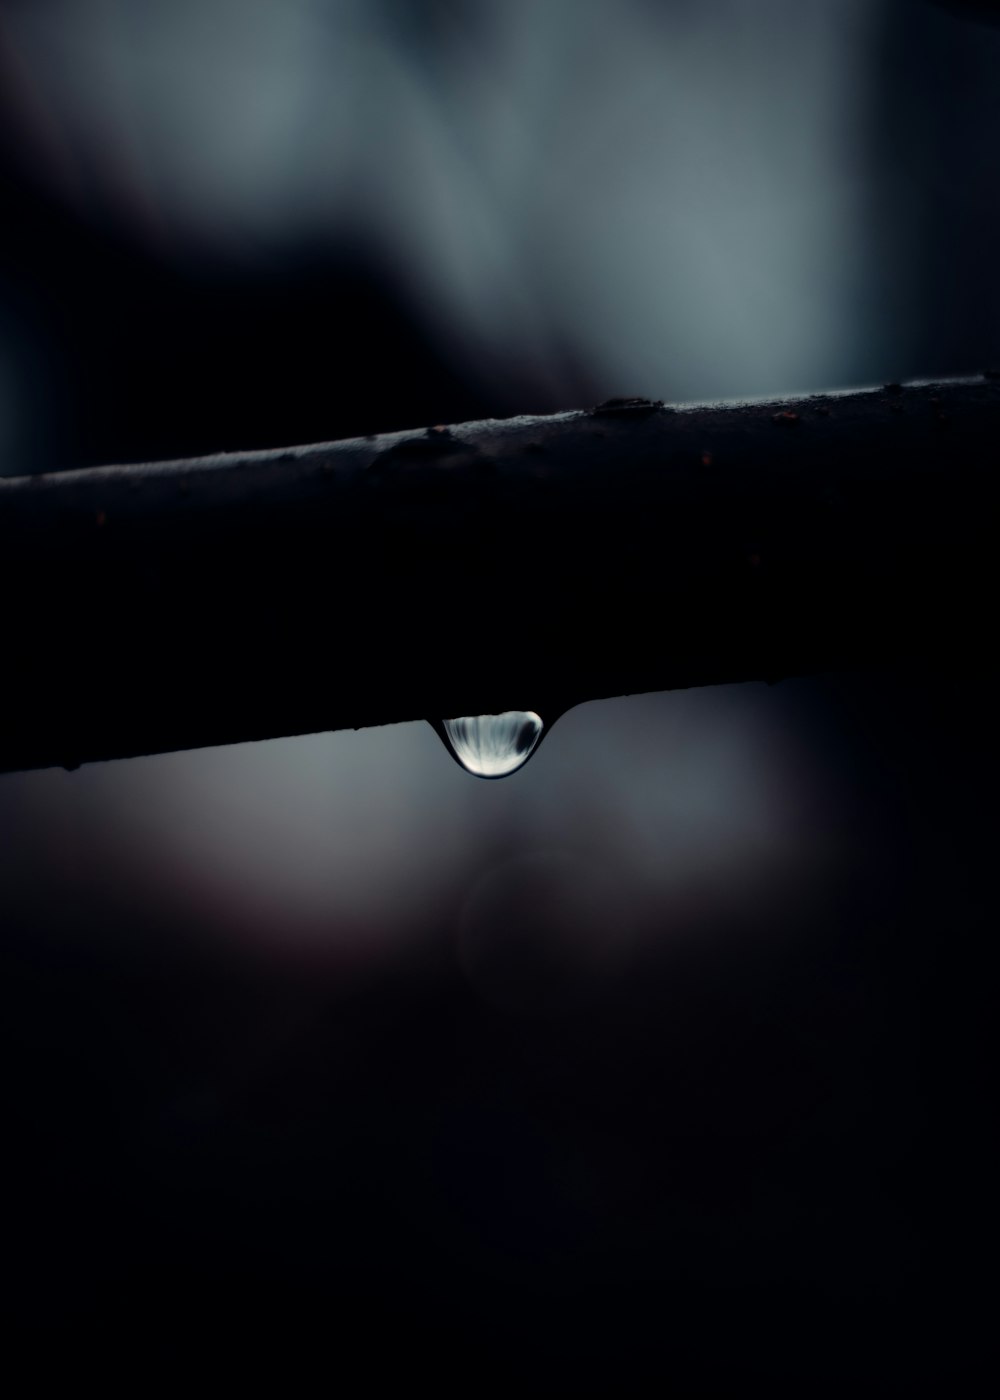 a drop of water sitting on top of a wooden stick